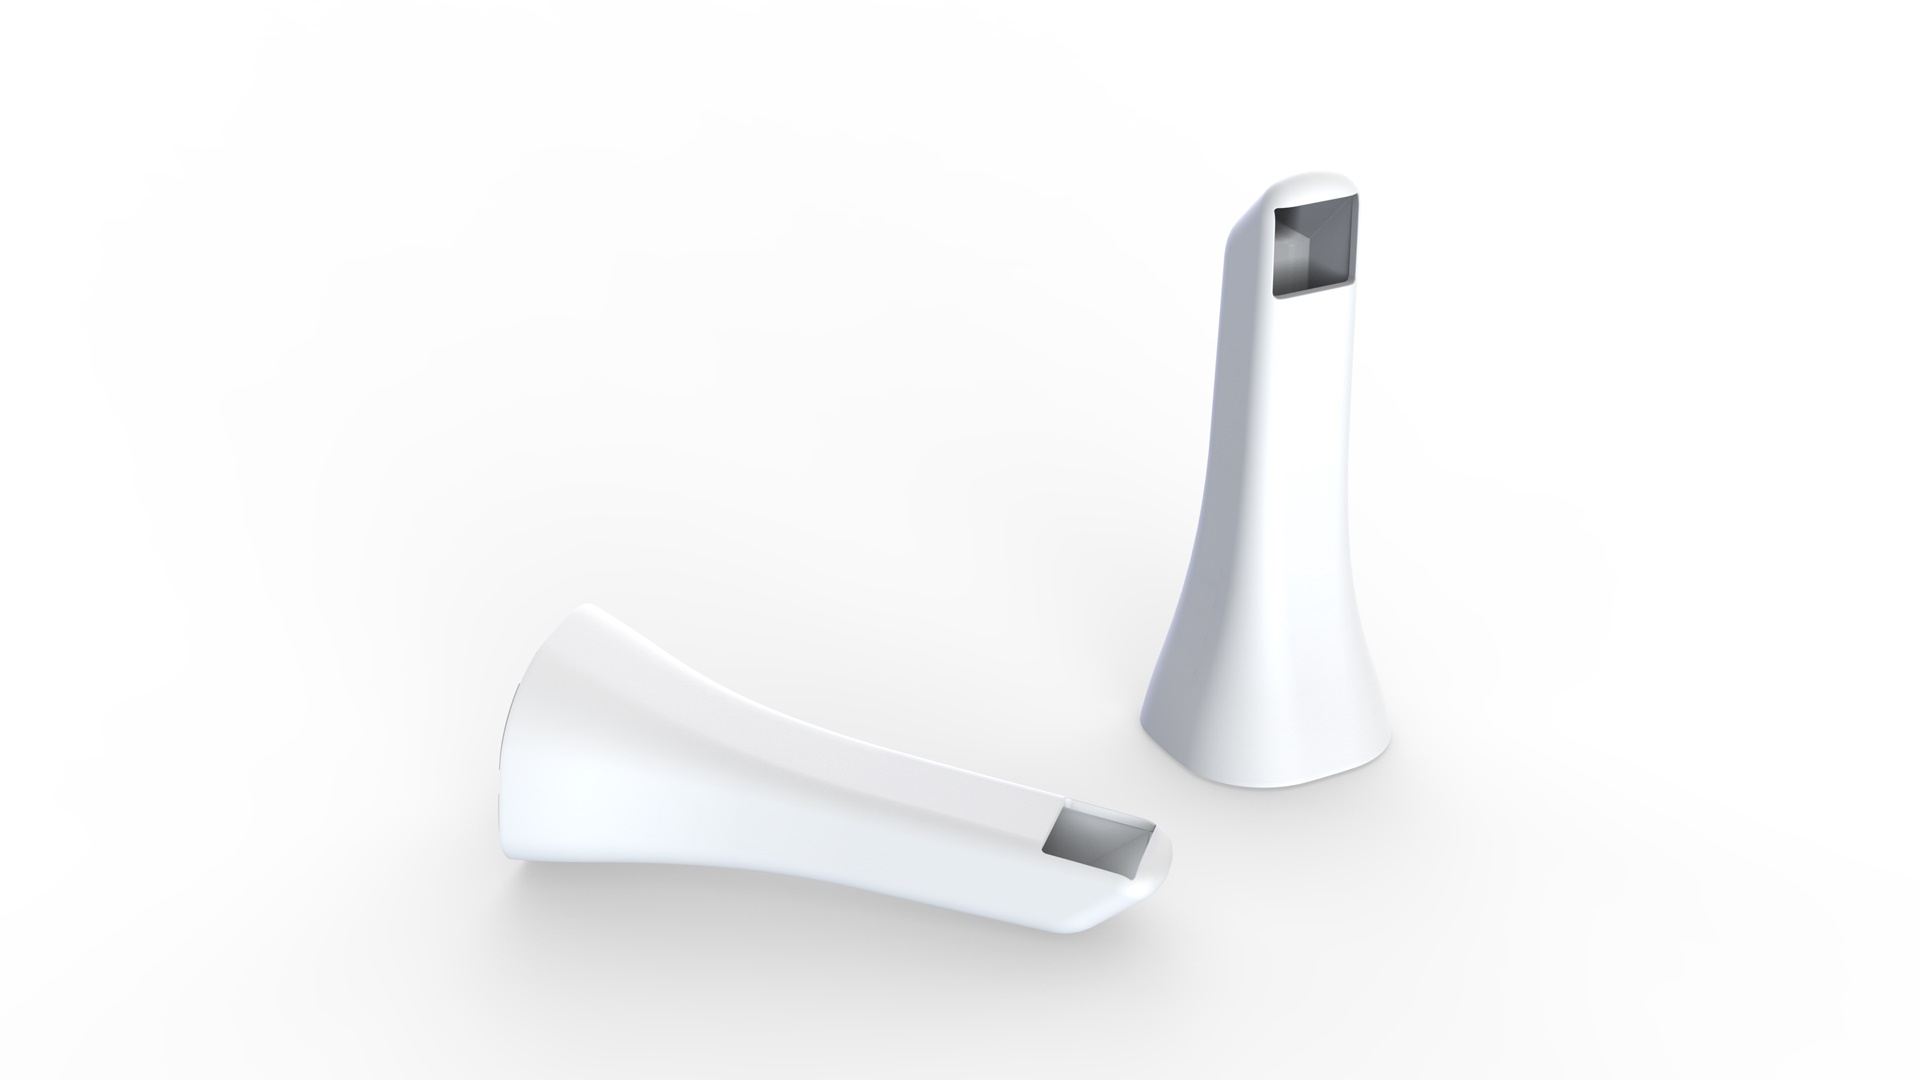 Which is Better for Intraoral Scanners - Single-use or Autoclavable Tips?